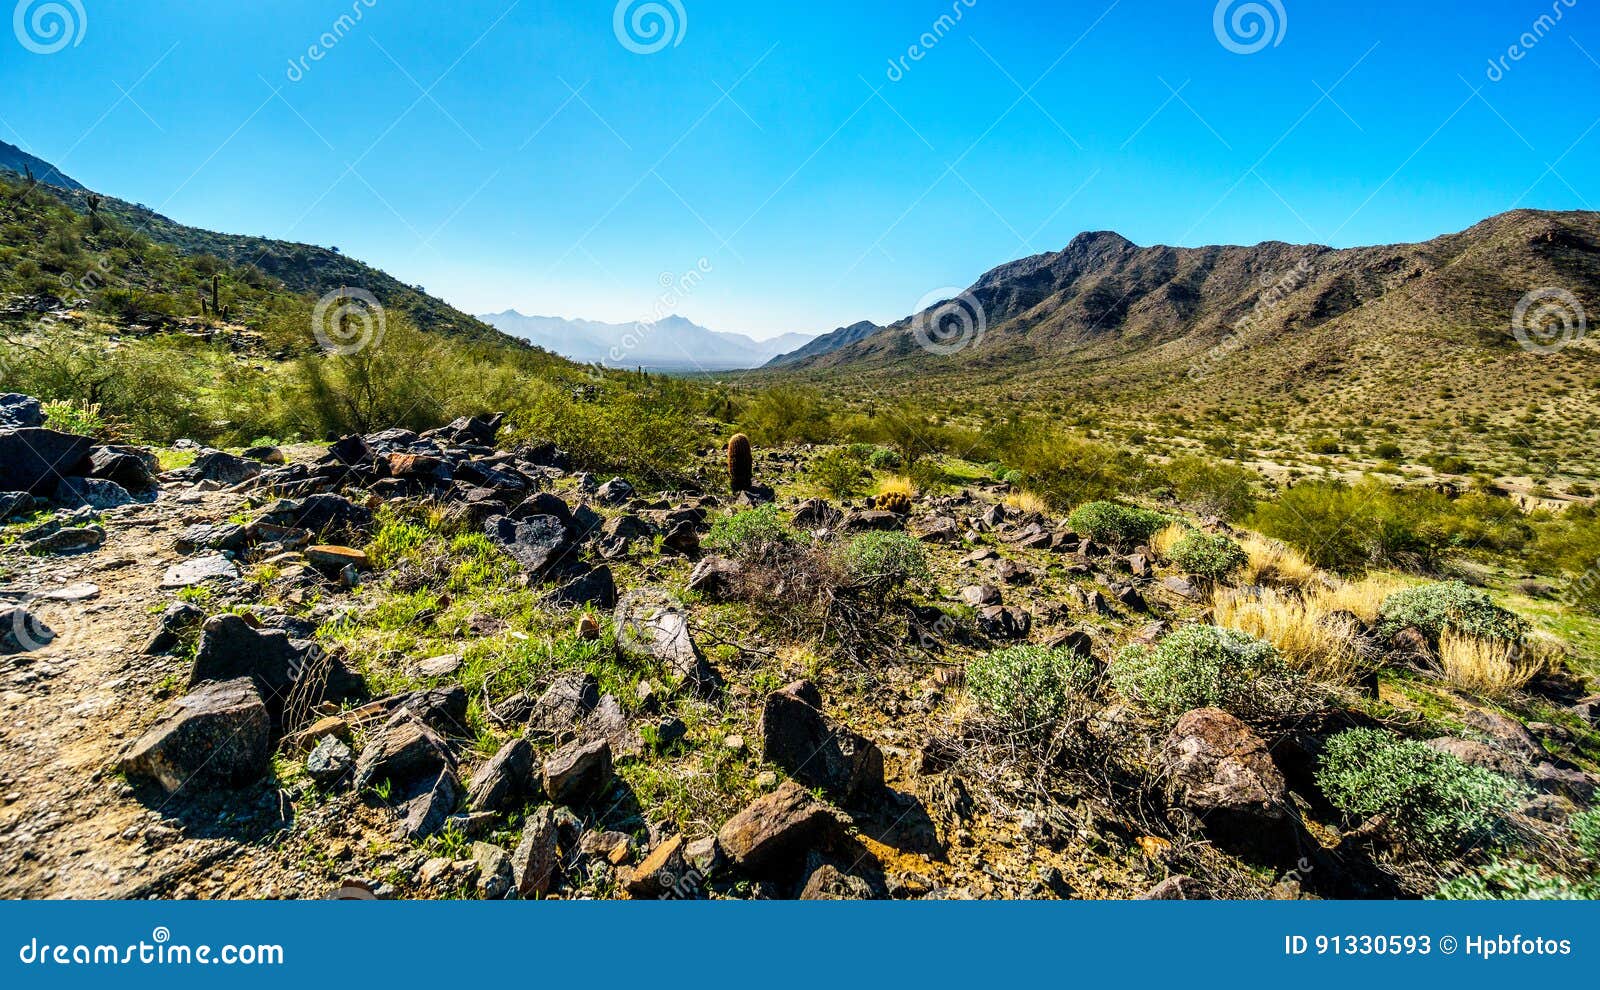 desert landscape with saguaro and barrel cacti along the bajada hiking trail in the mountains of south mountain park